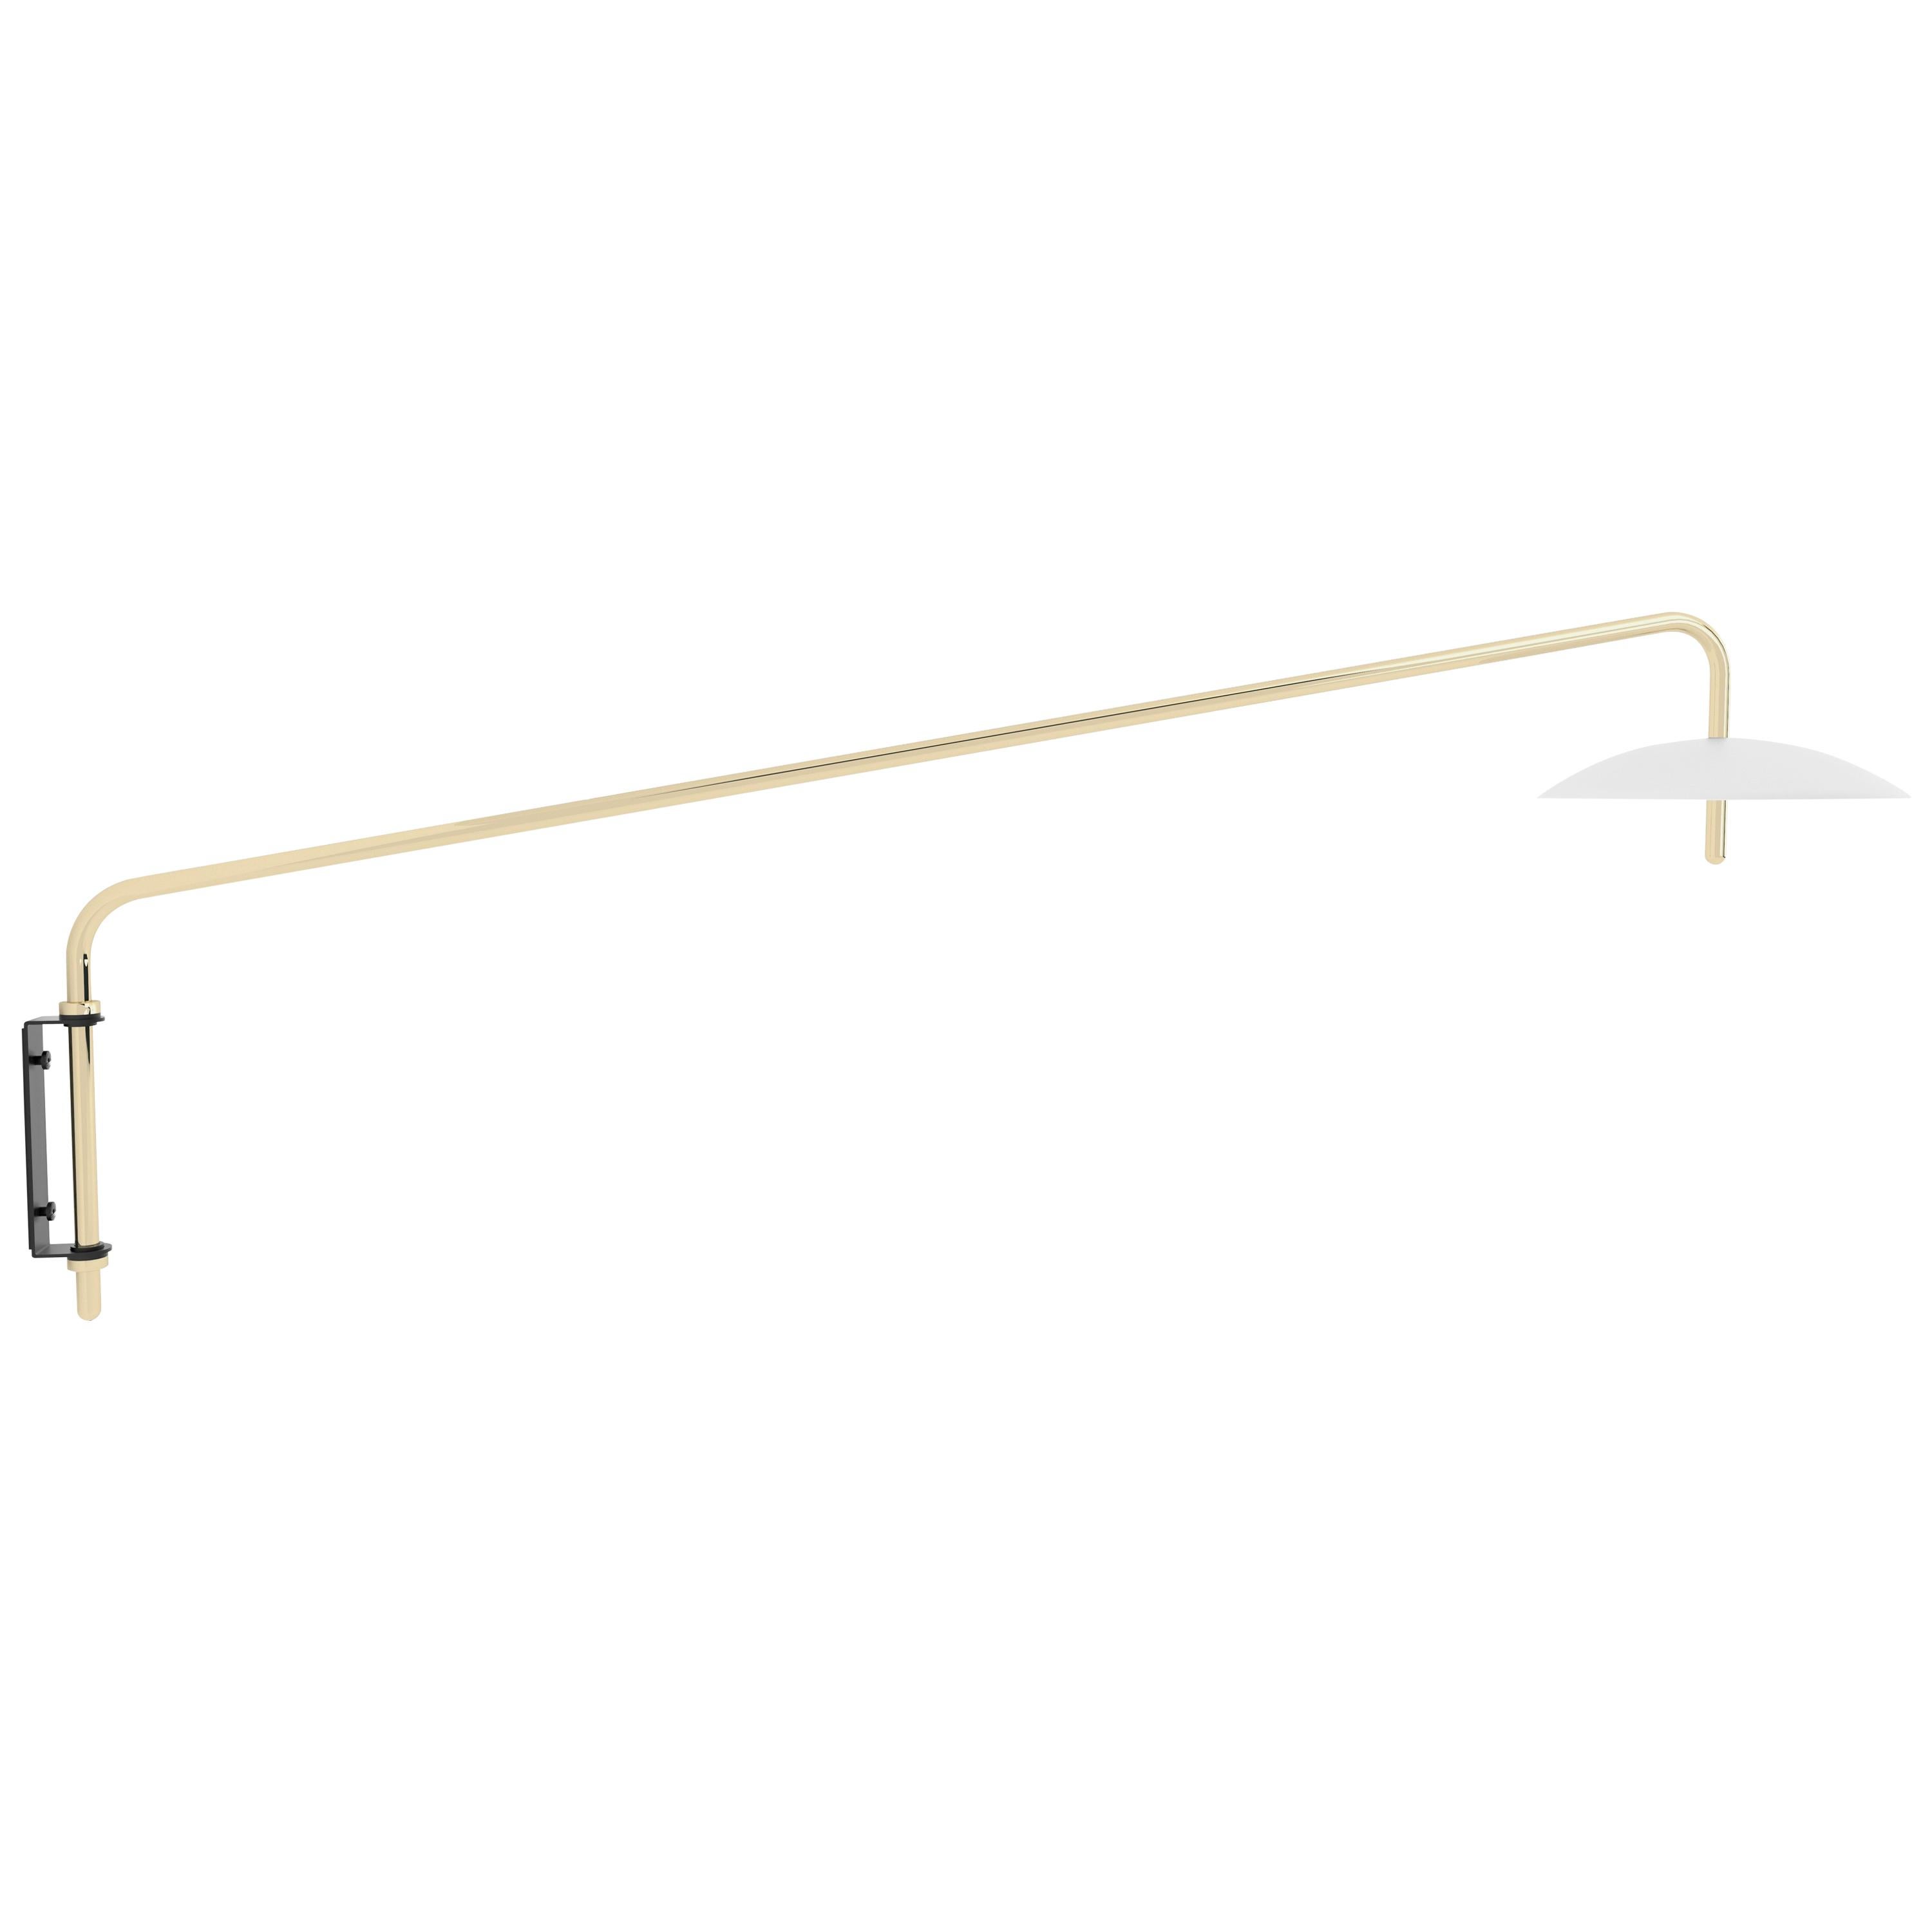 The Signal arm sconce is a rotatable sconce that seamlessly blend the Mid-Century Modern aesthetic with that of science fiction. A bent aluminum tube cantilevers from a wall-mounted bracket to allow the spun shade to hover above any interior. Clean,